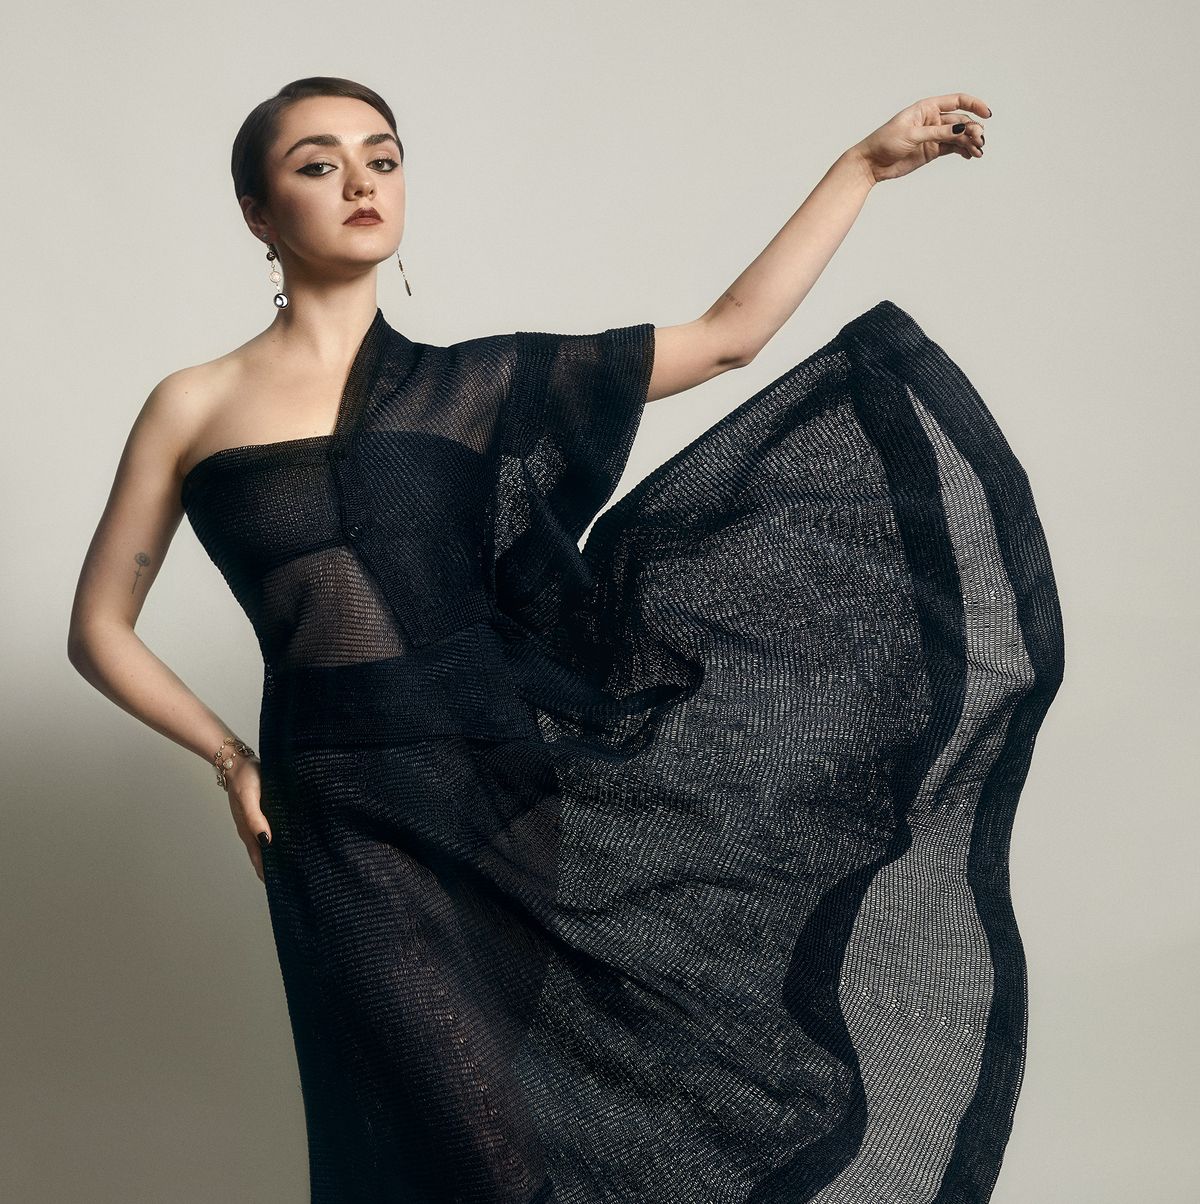 The New Look: Maisie Williams interview - on fashion, ﻿family and love